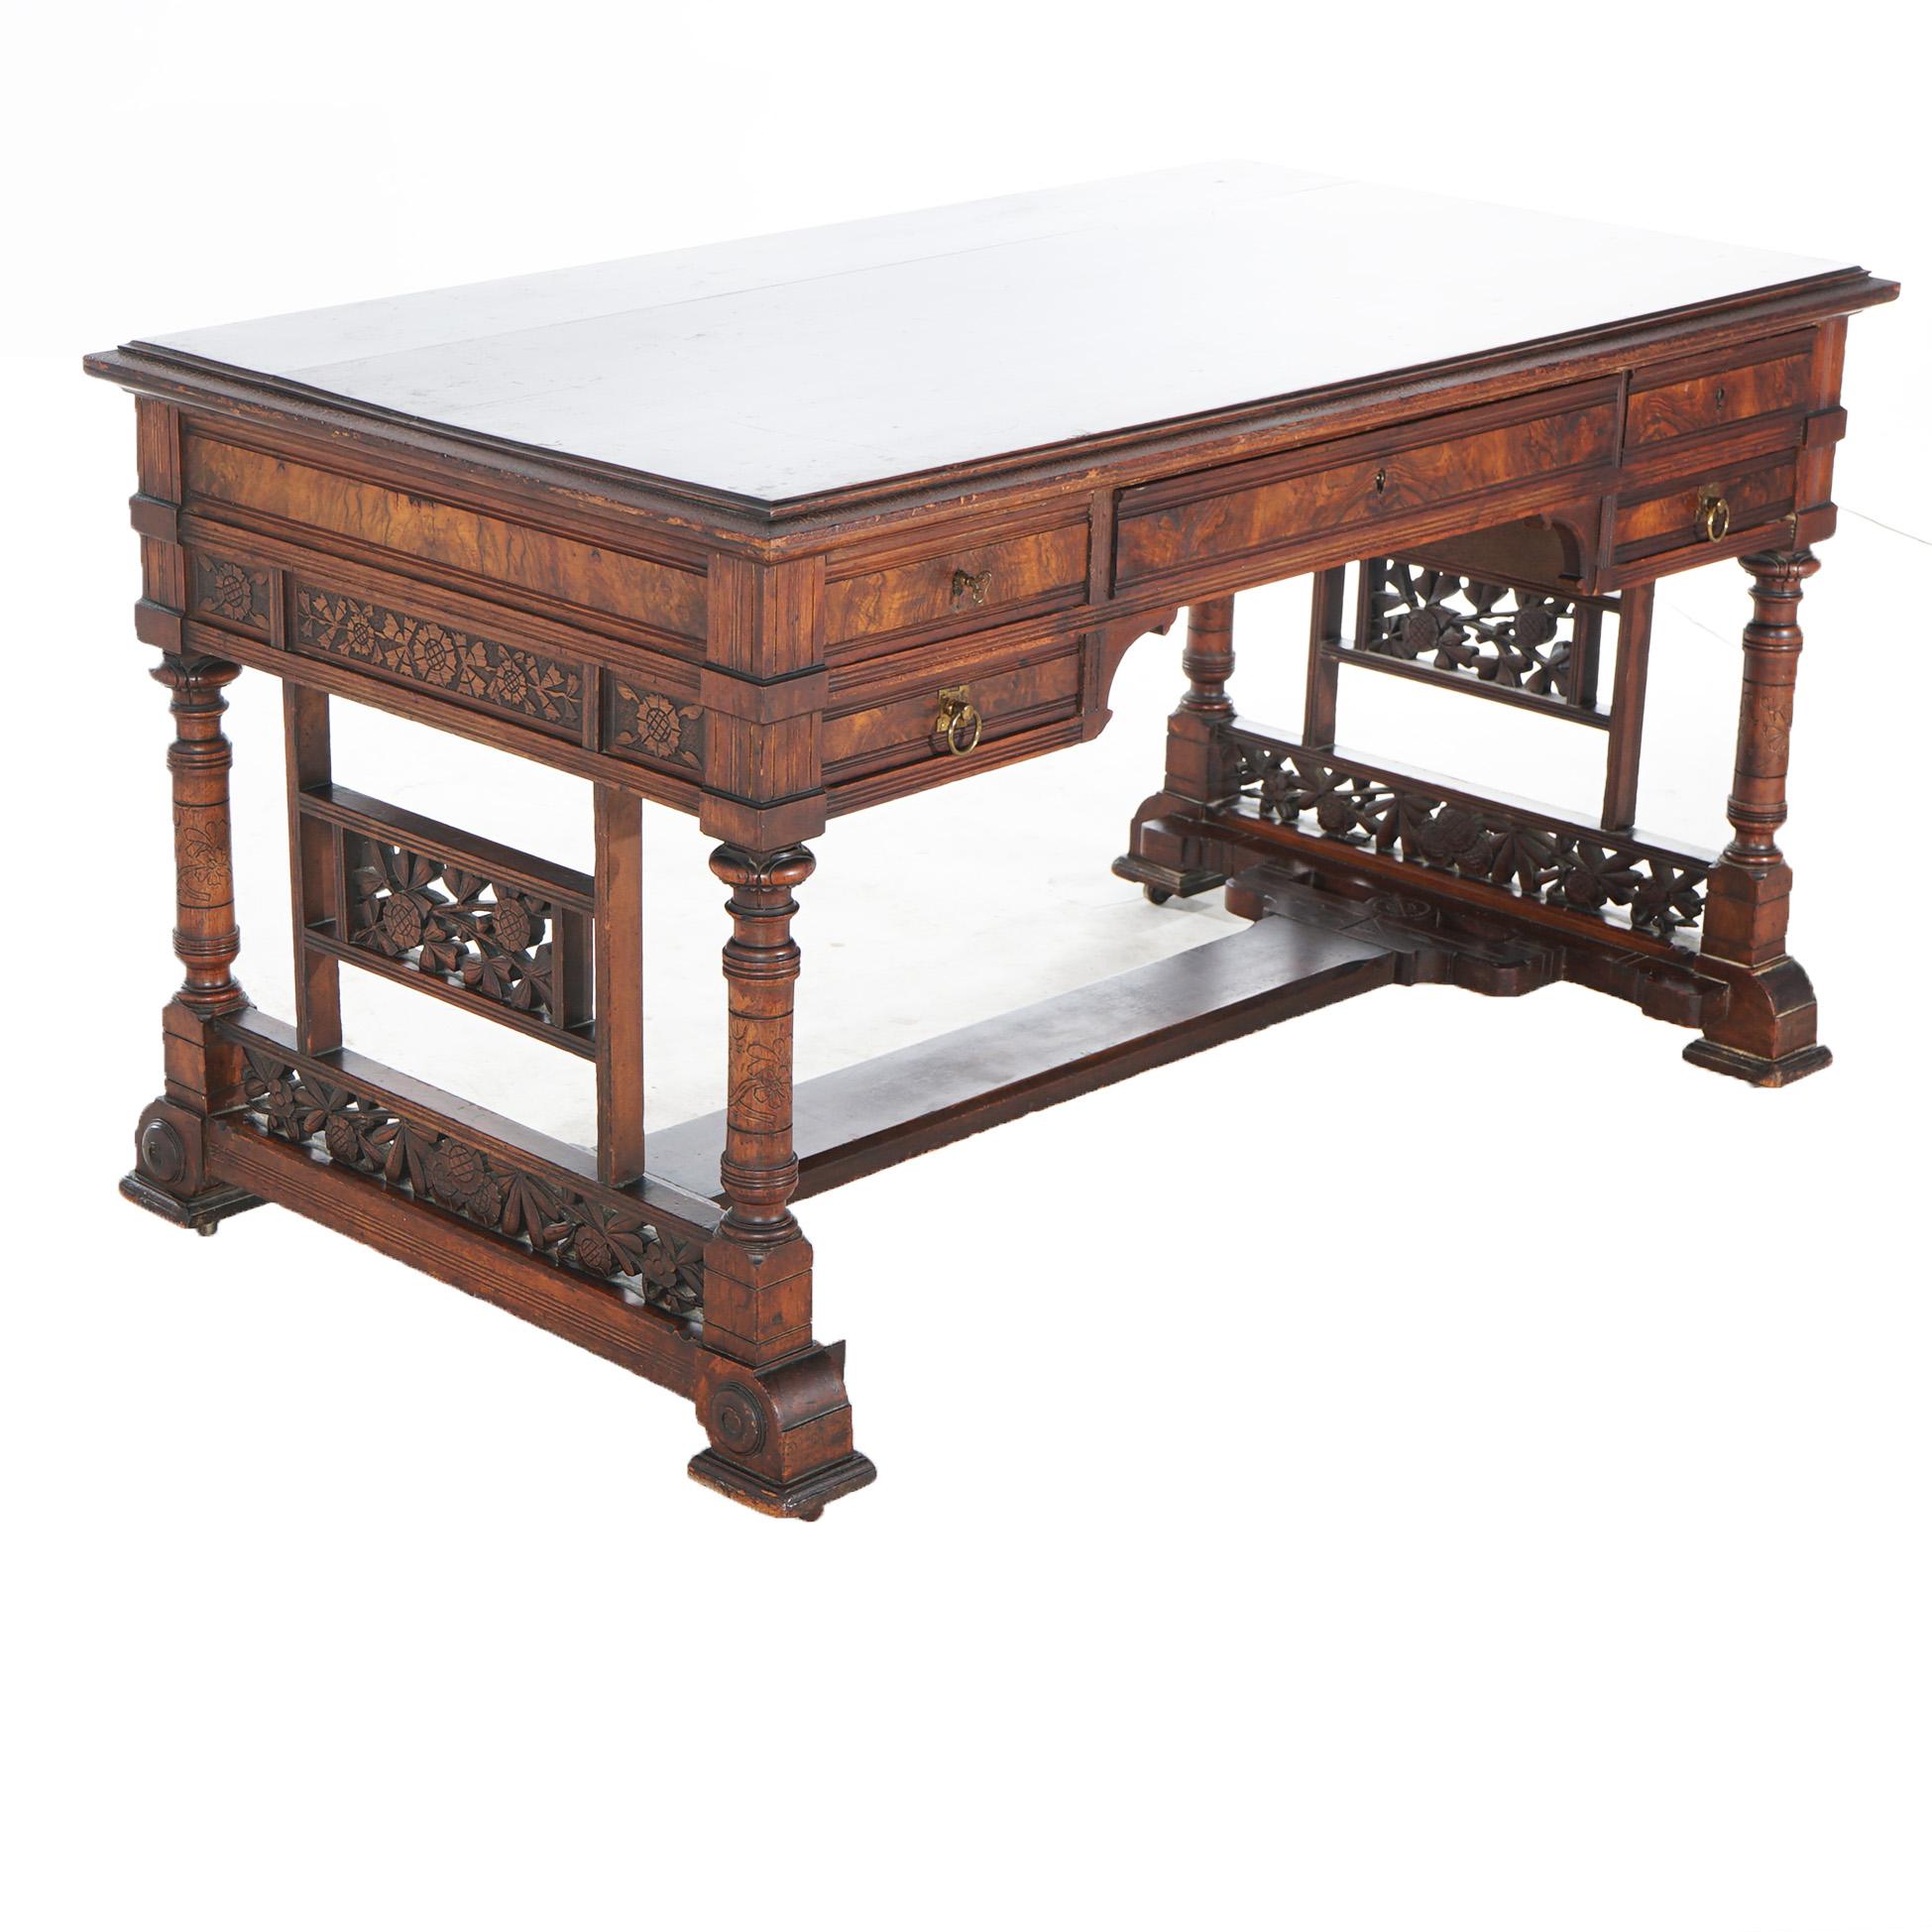 ***Ask About Reduced In-House Shipping Rates - Reliable Service & Fully Insured***
An antique Aesthetic Eastlake partners desk offers walnut construction with beveled top over case on trestle base having legs with foliate carved panels,